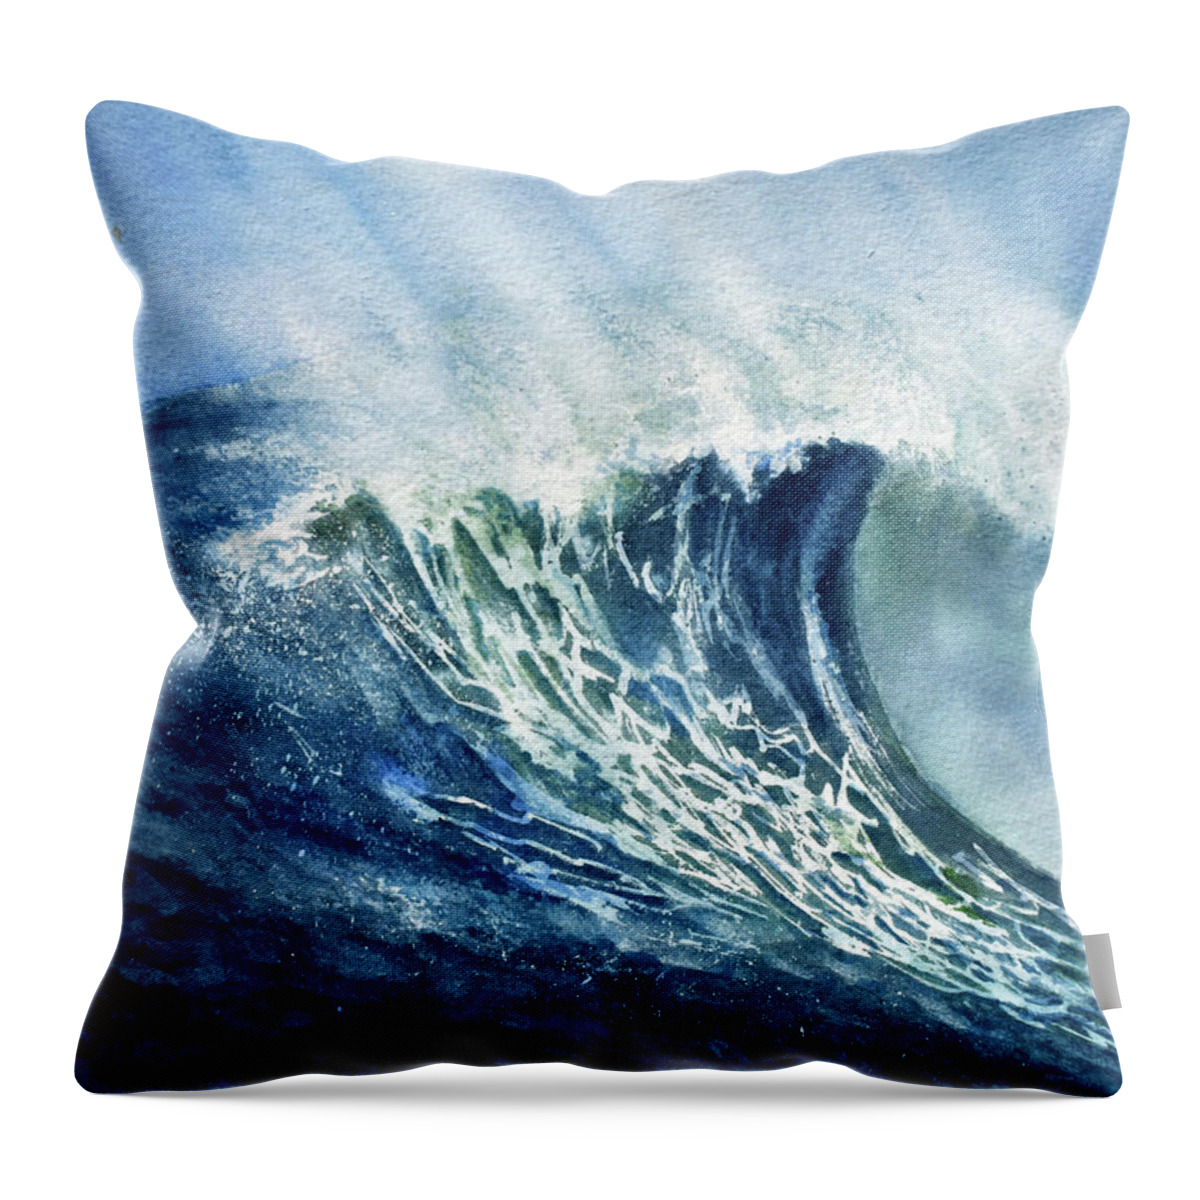 Ocean Throw Pillow featuring the painting The Wave by Wendy Keeney-Kennicutt